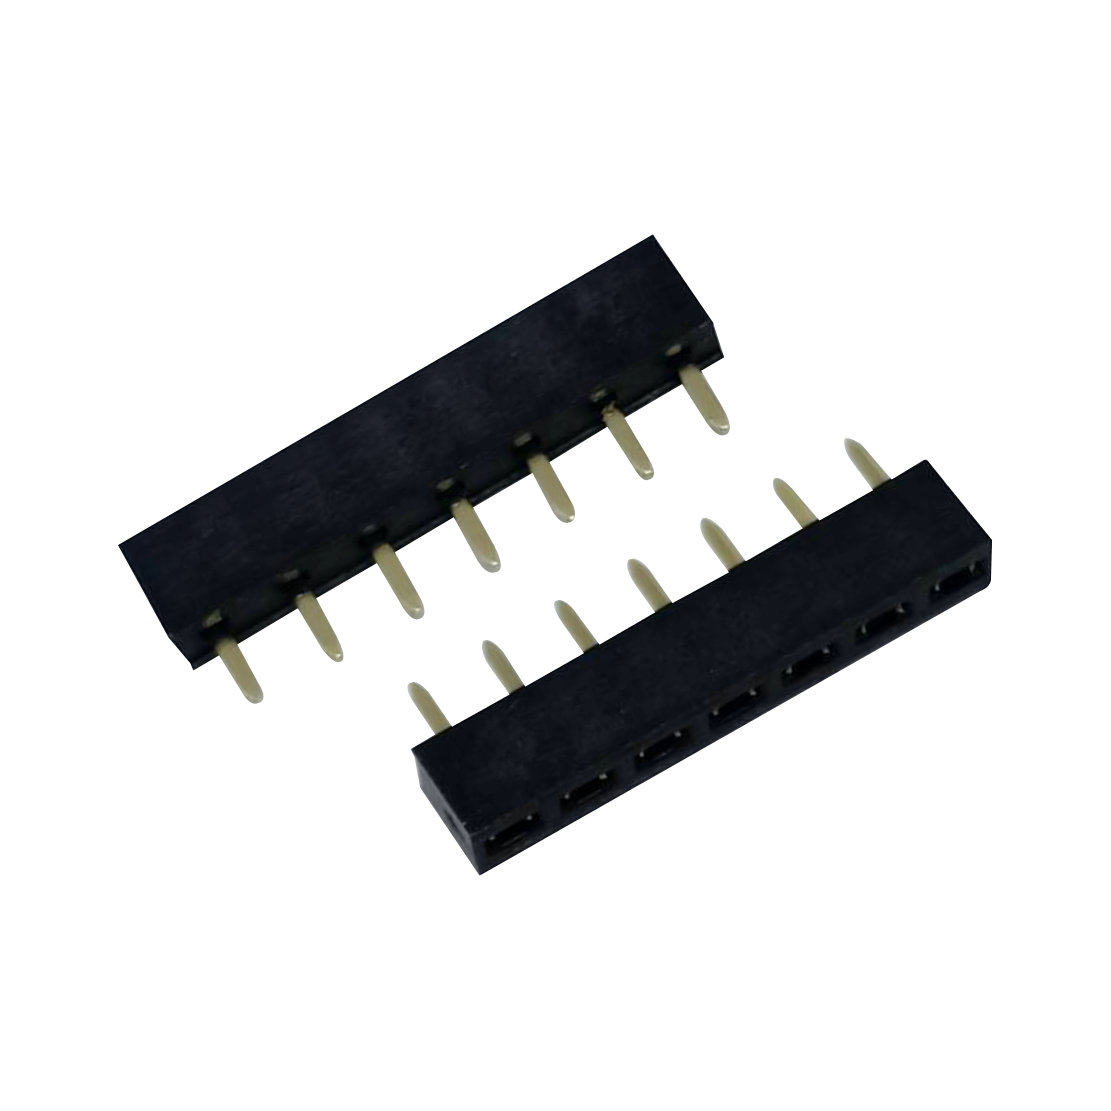 2.54mm Single Row Straight Socket Strip 3.6 Profile equivalent to SSW-1 series